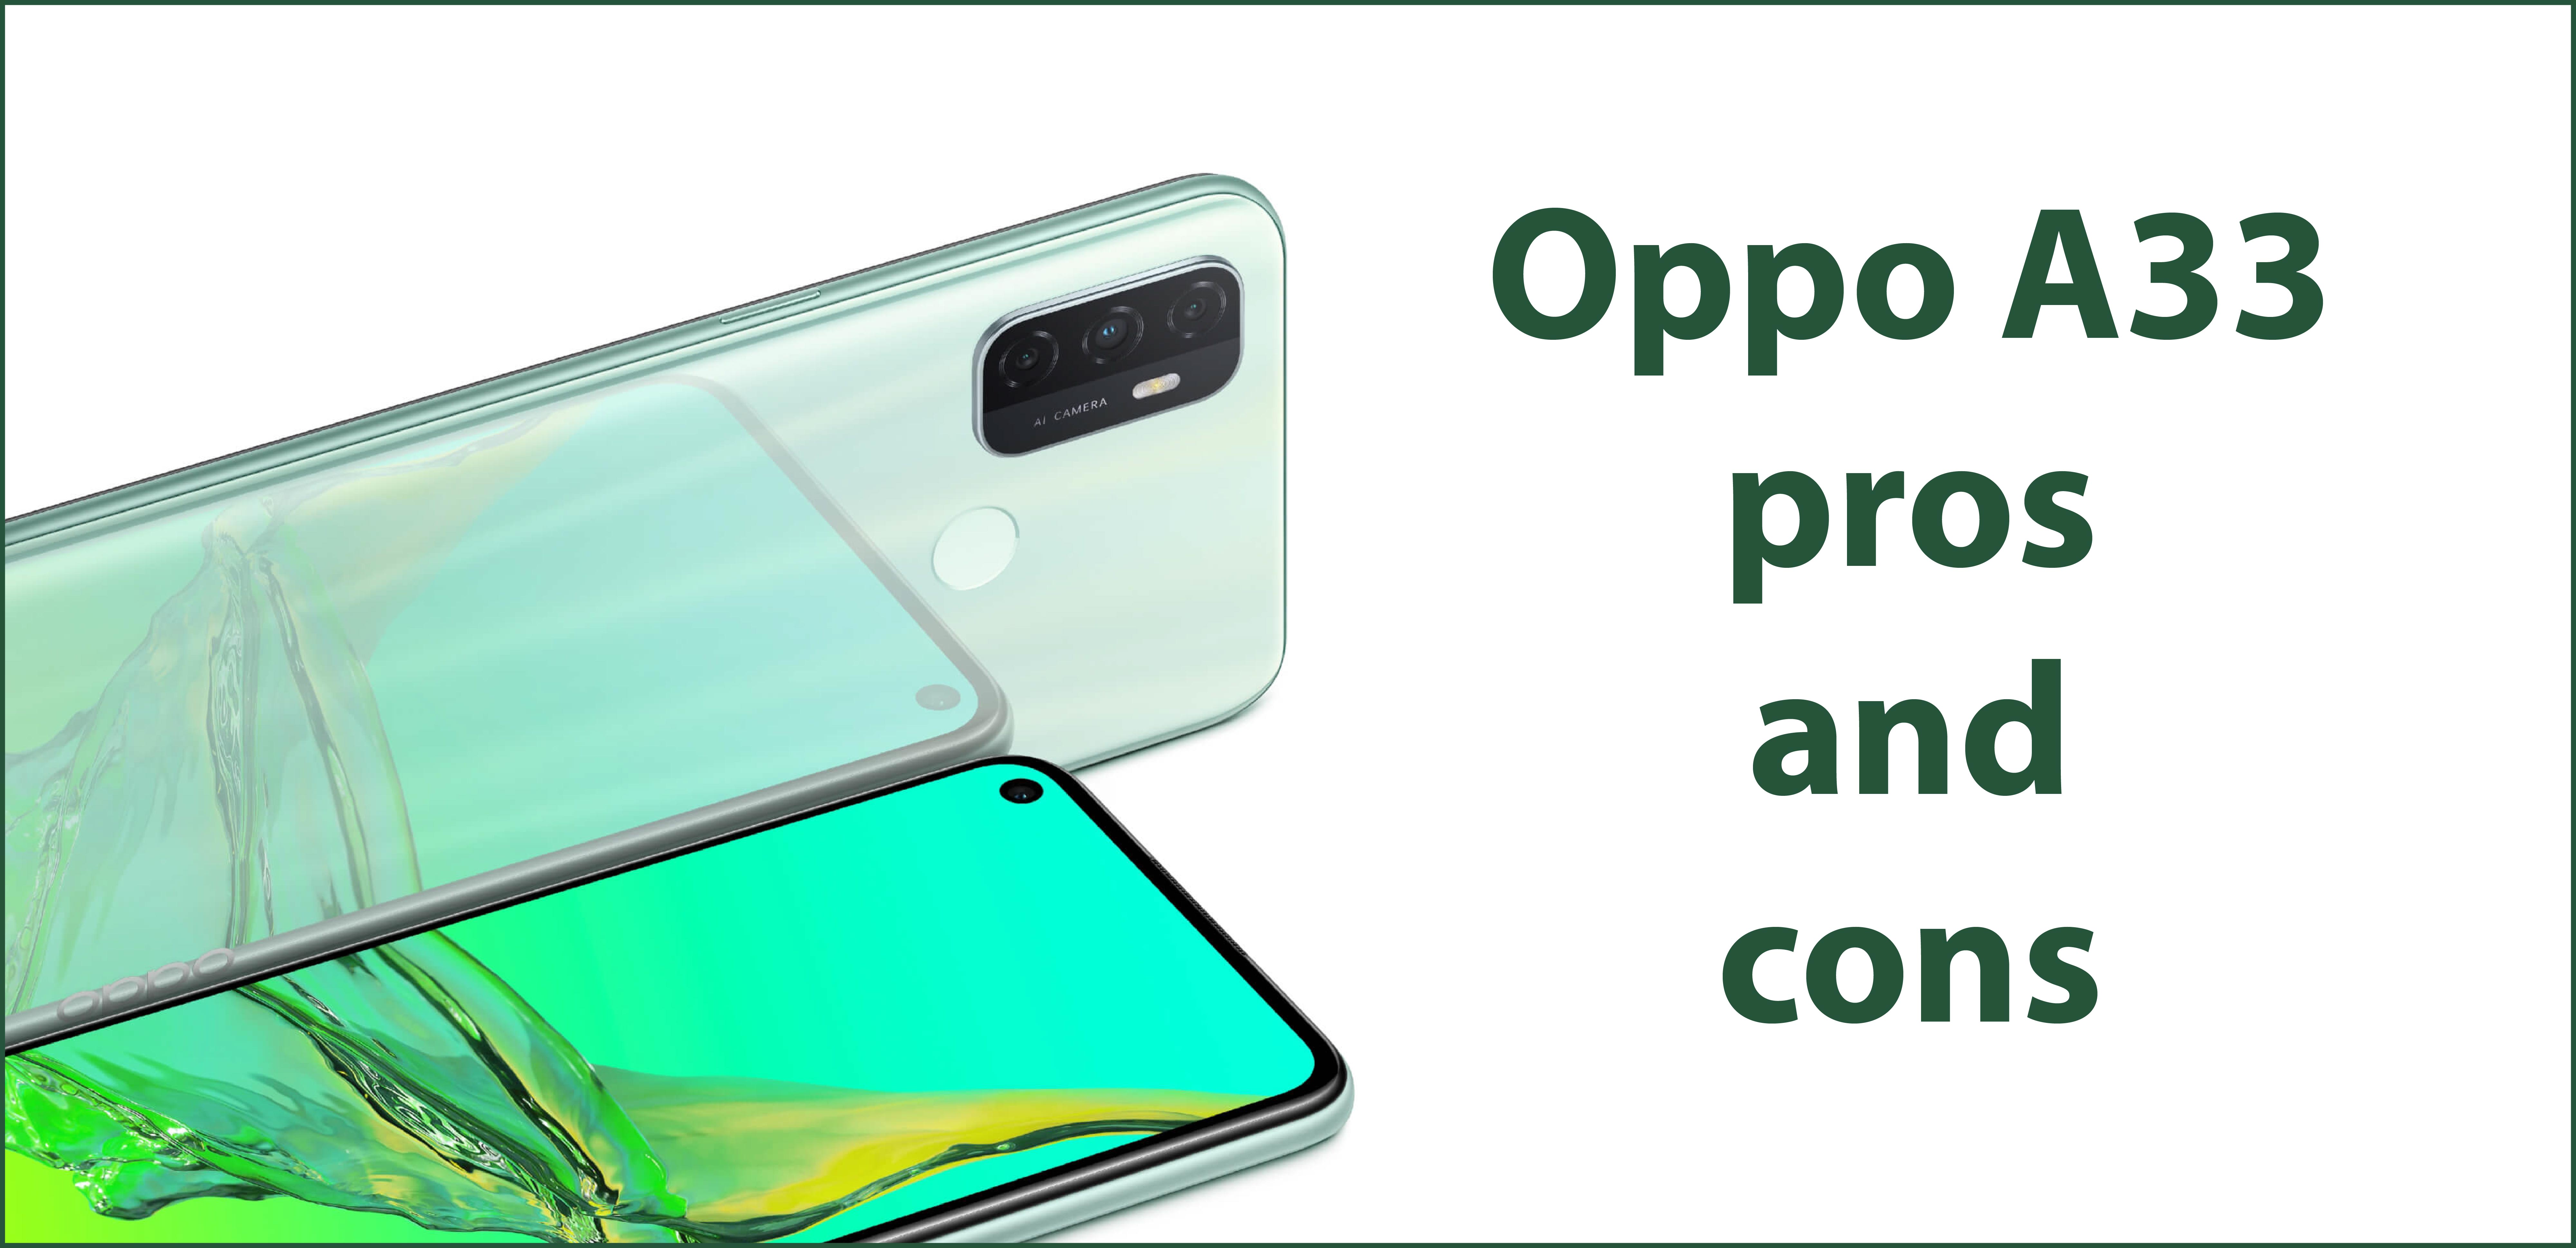 Oppo A33 pros and cons